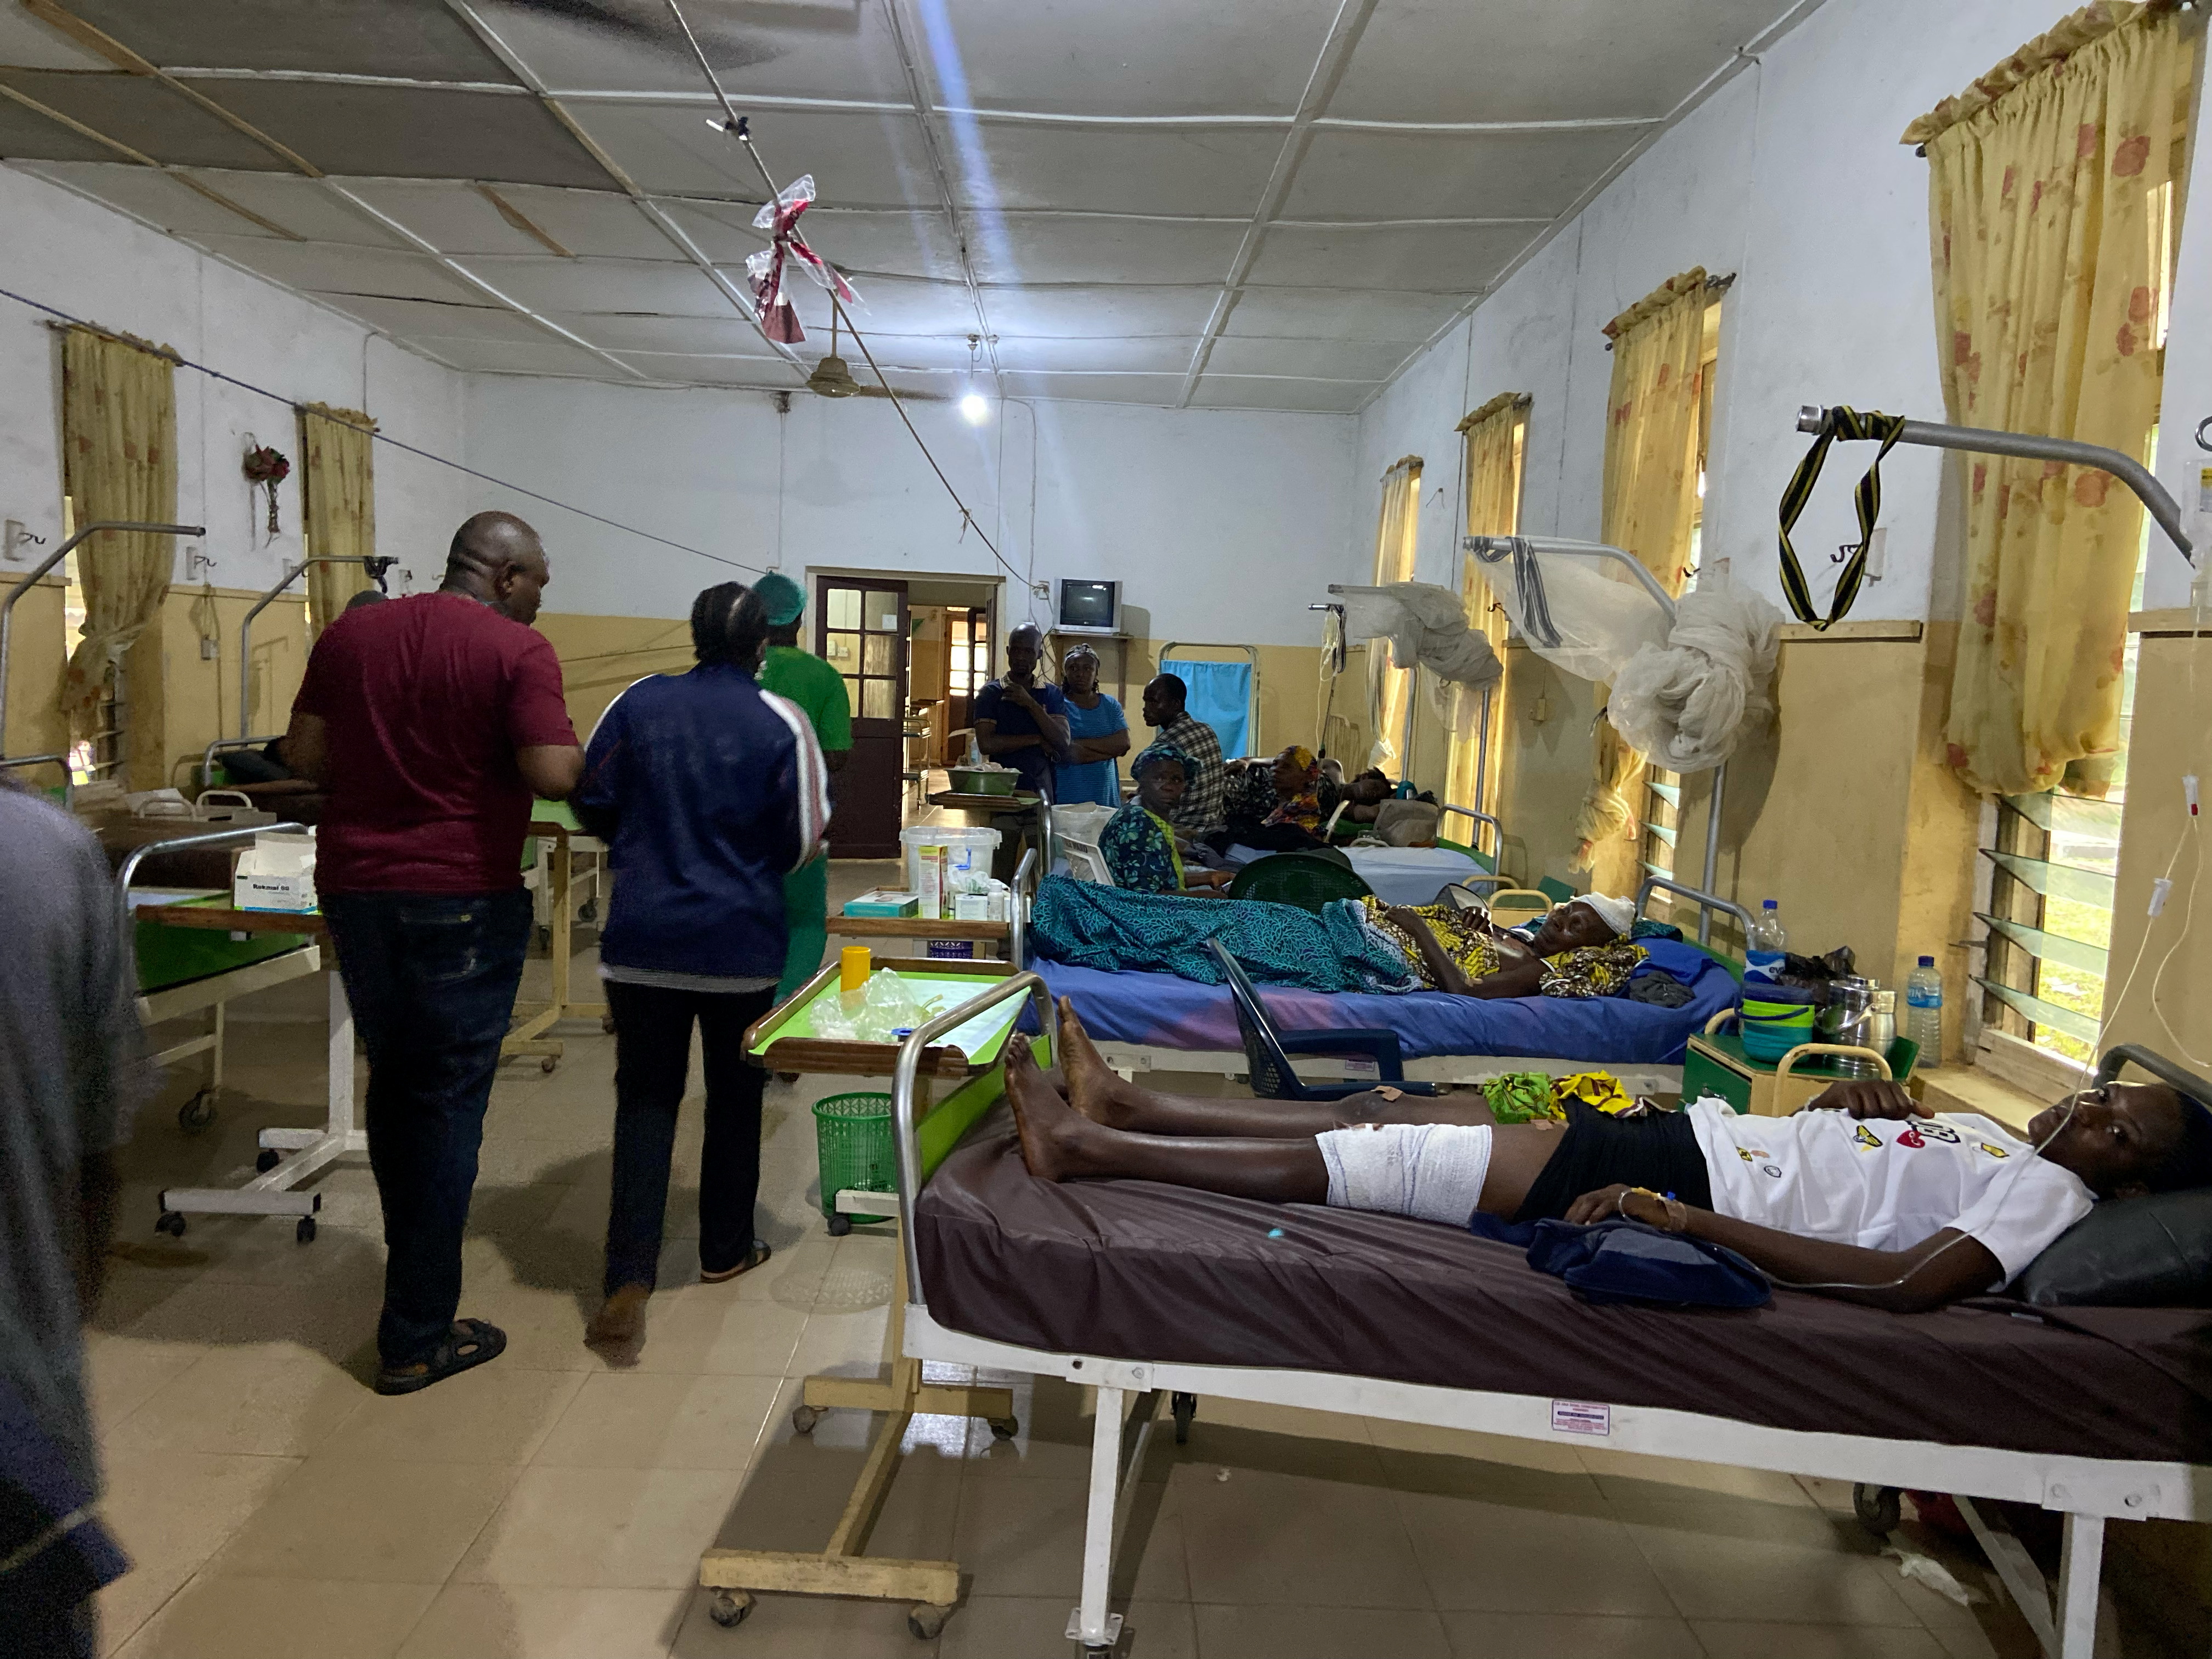 Victims of the bomb attack during a Catholic mass at St. Francis Catholic church receive treatment at St. Louis Catholic Hospital, in Owo